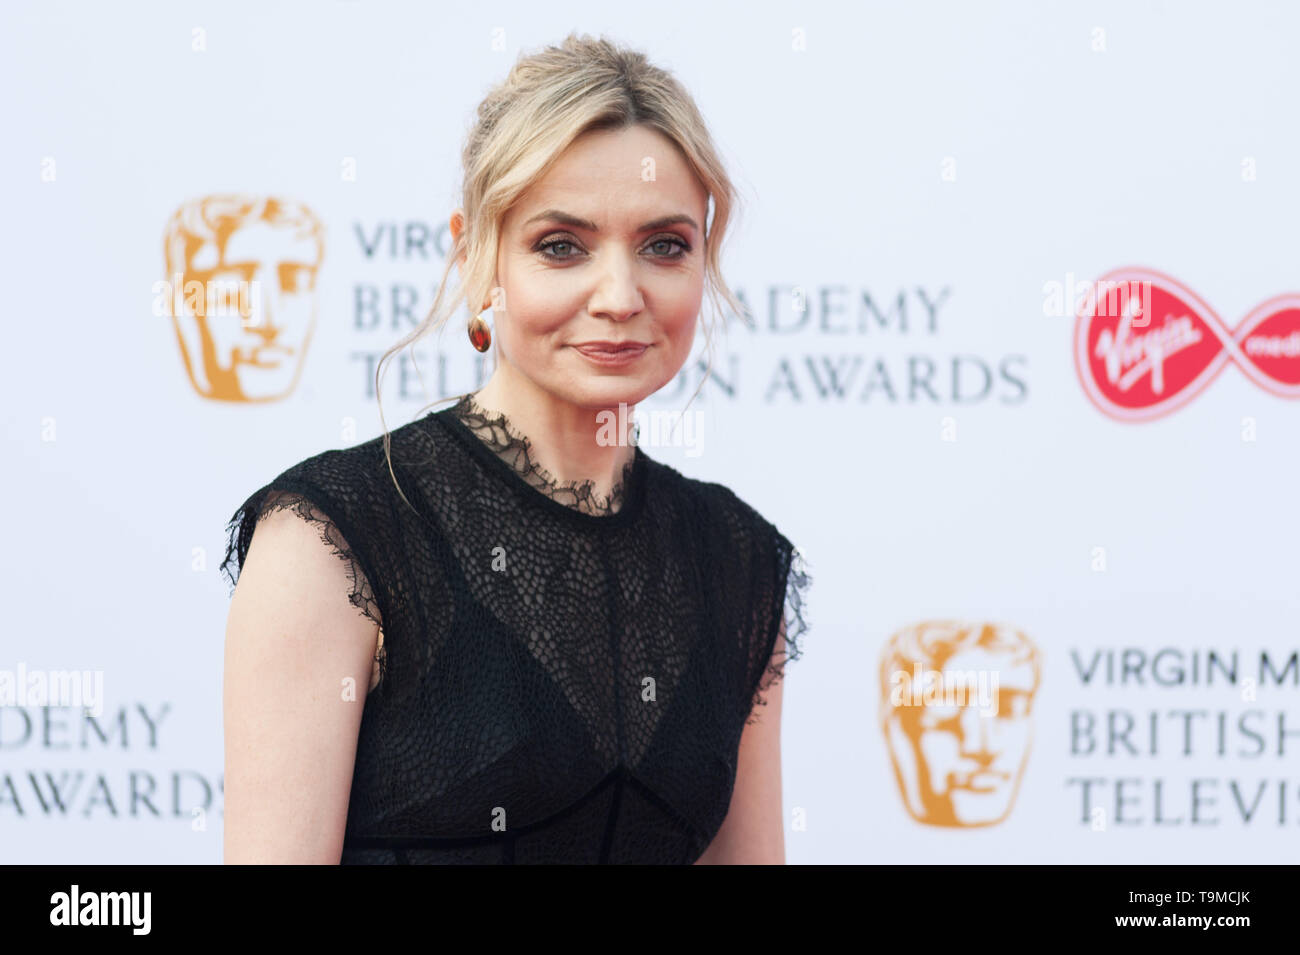 London, UK. 12th May 2019. Christine Bottomley attends the Virgin Media British Academy Television Awards ceremony at the Royal Festival Hall. Credit: Wiktor Szymanowicz/Alamy Live News Stock Photo